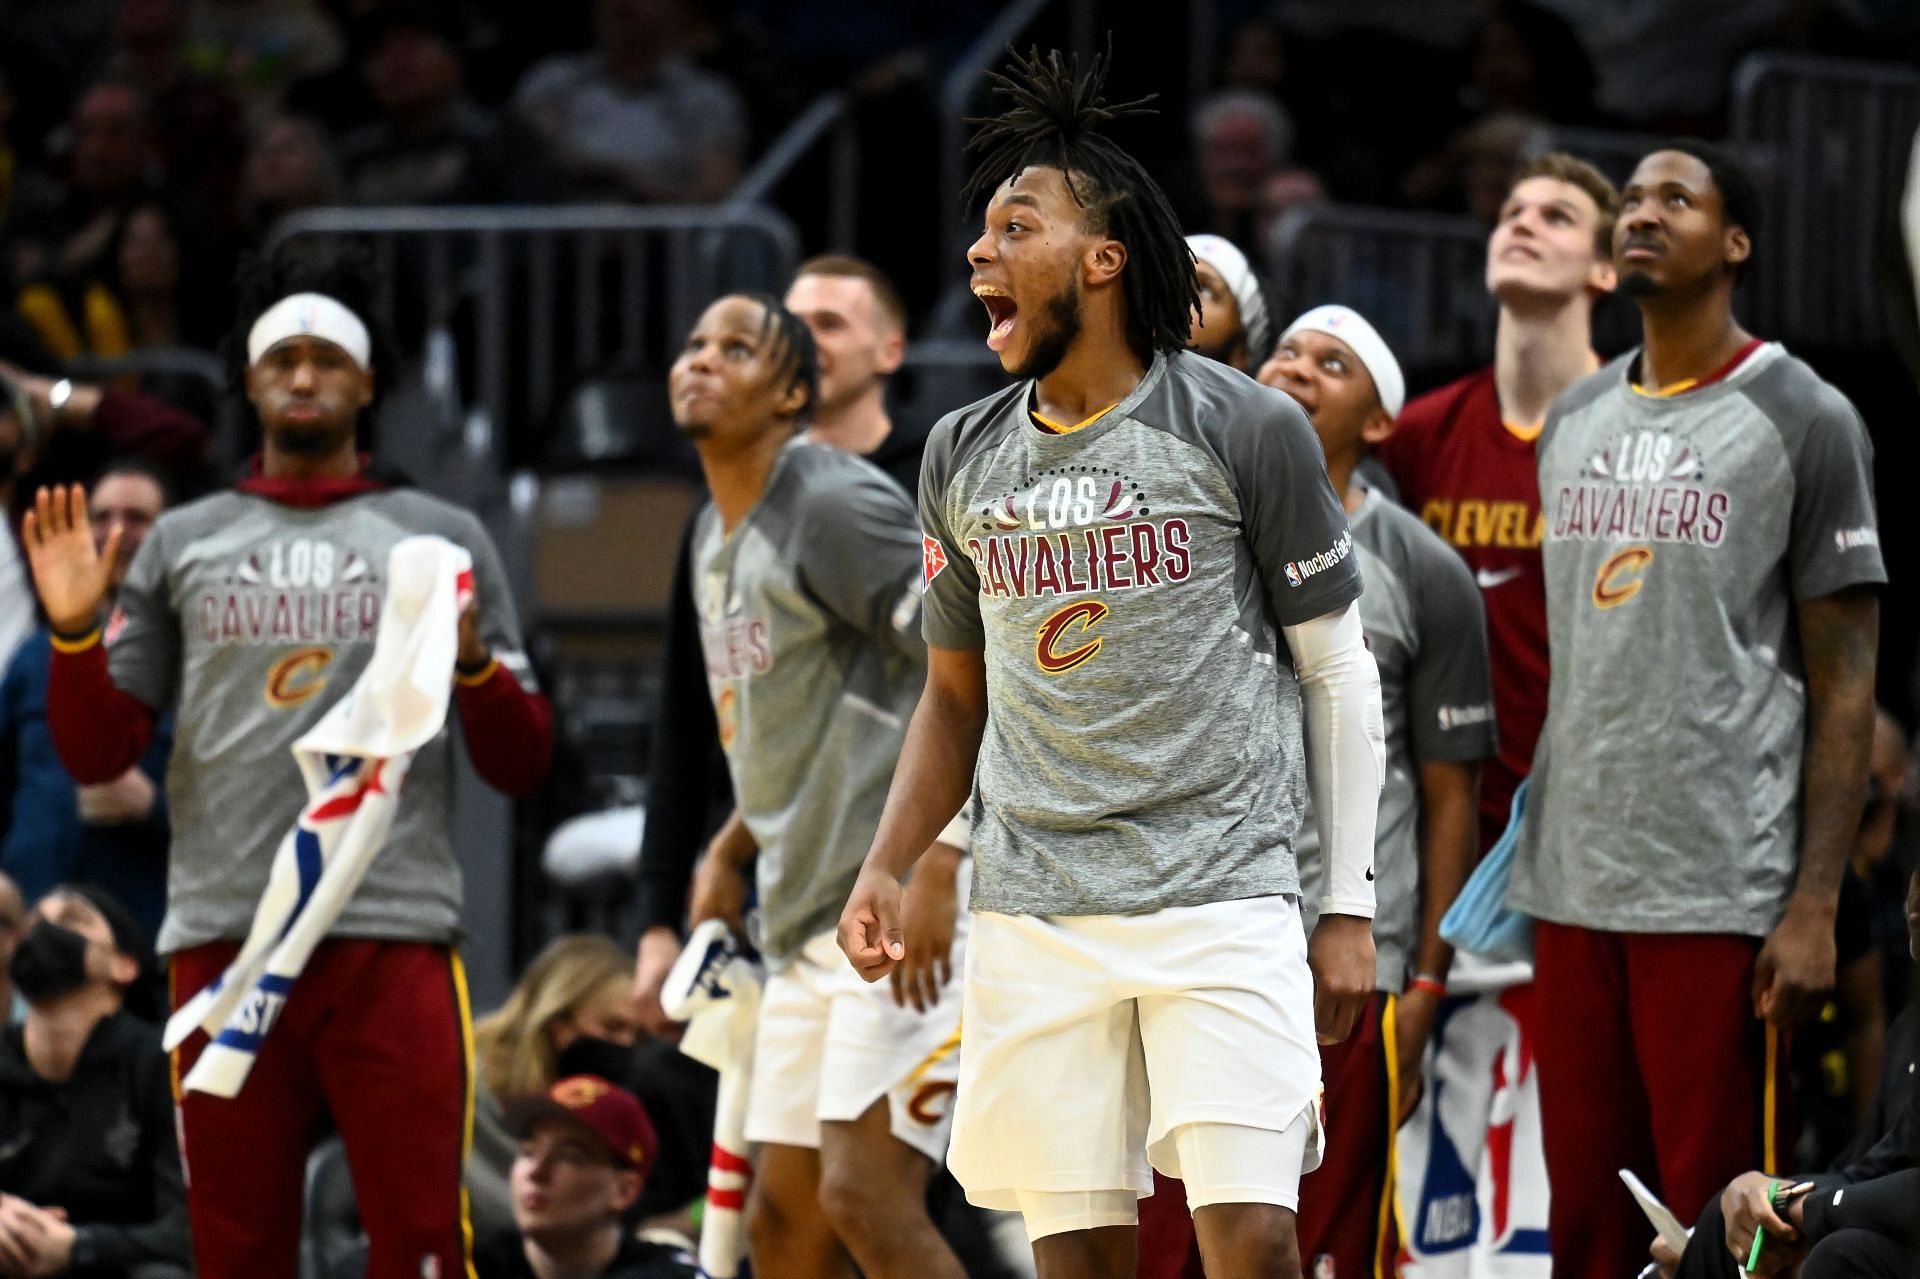 Cleveland Cavaliers will take on the 76ers at home on Wednesday